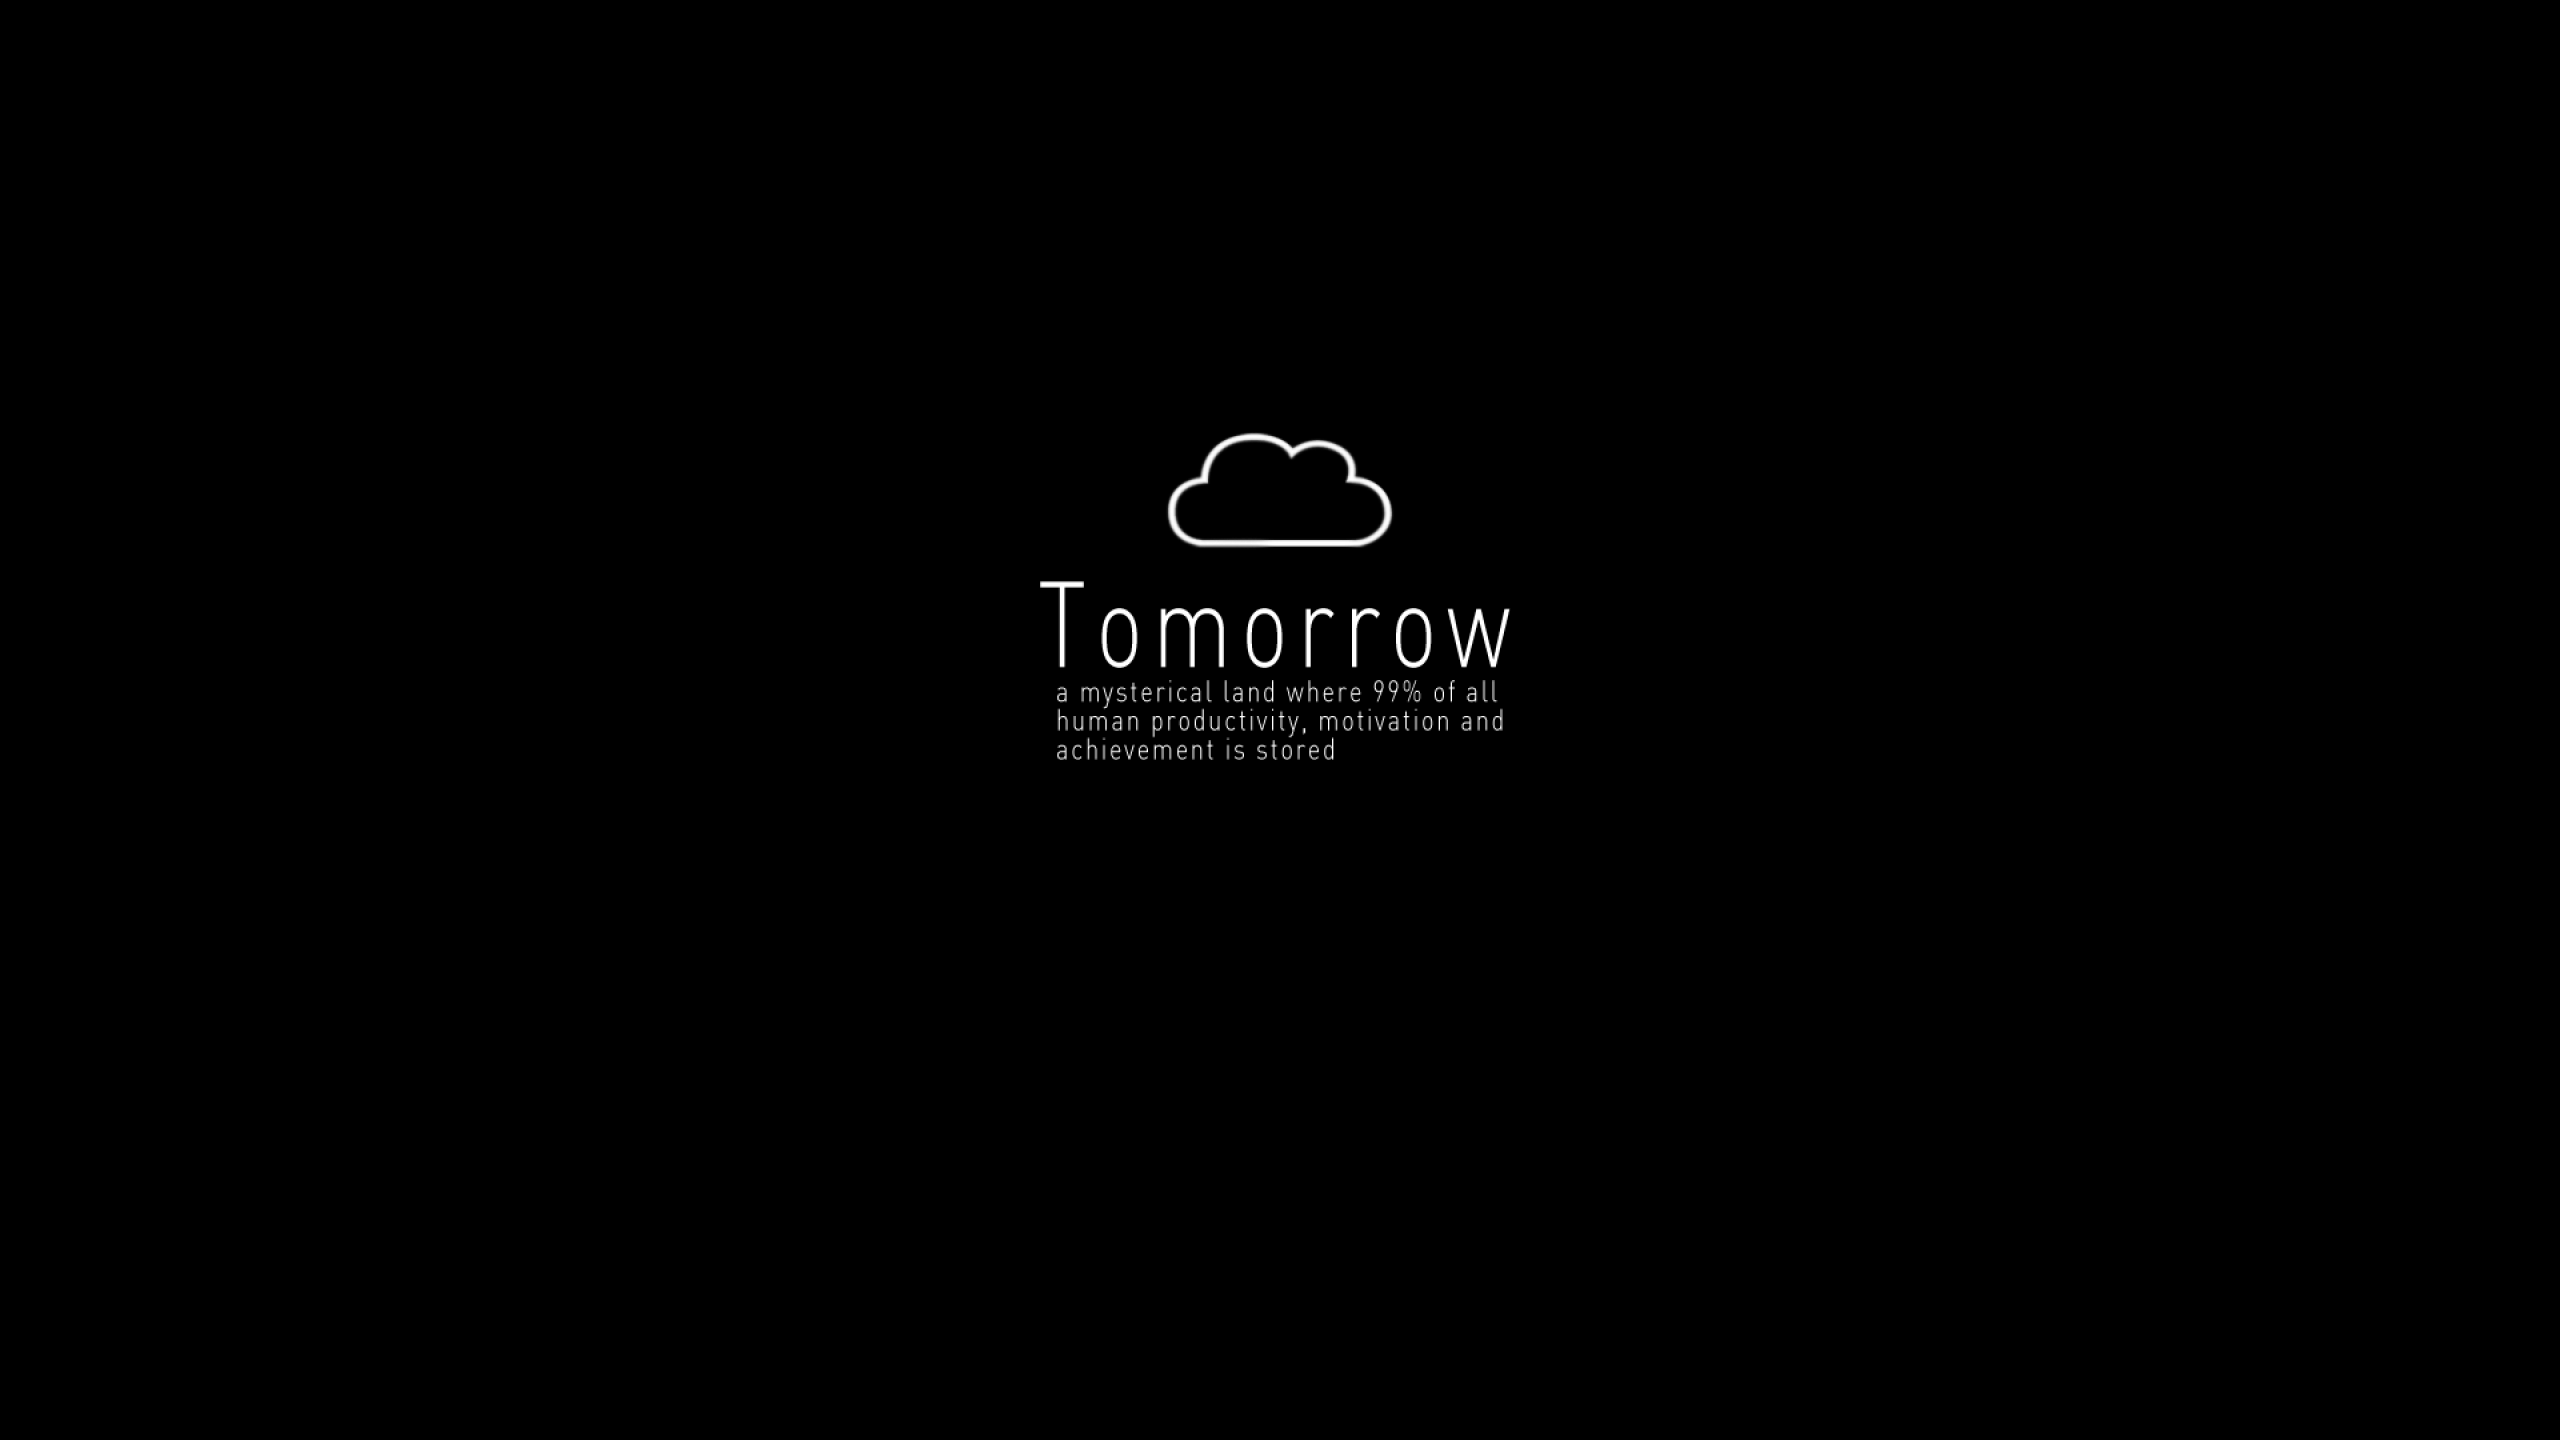 Tomorrow Quotes HD Wallpaper, Desktop Background, Mobile